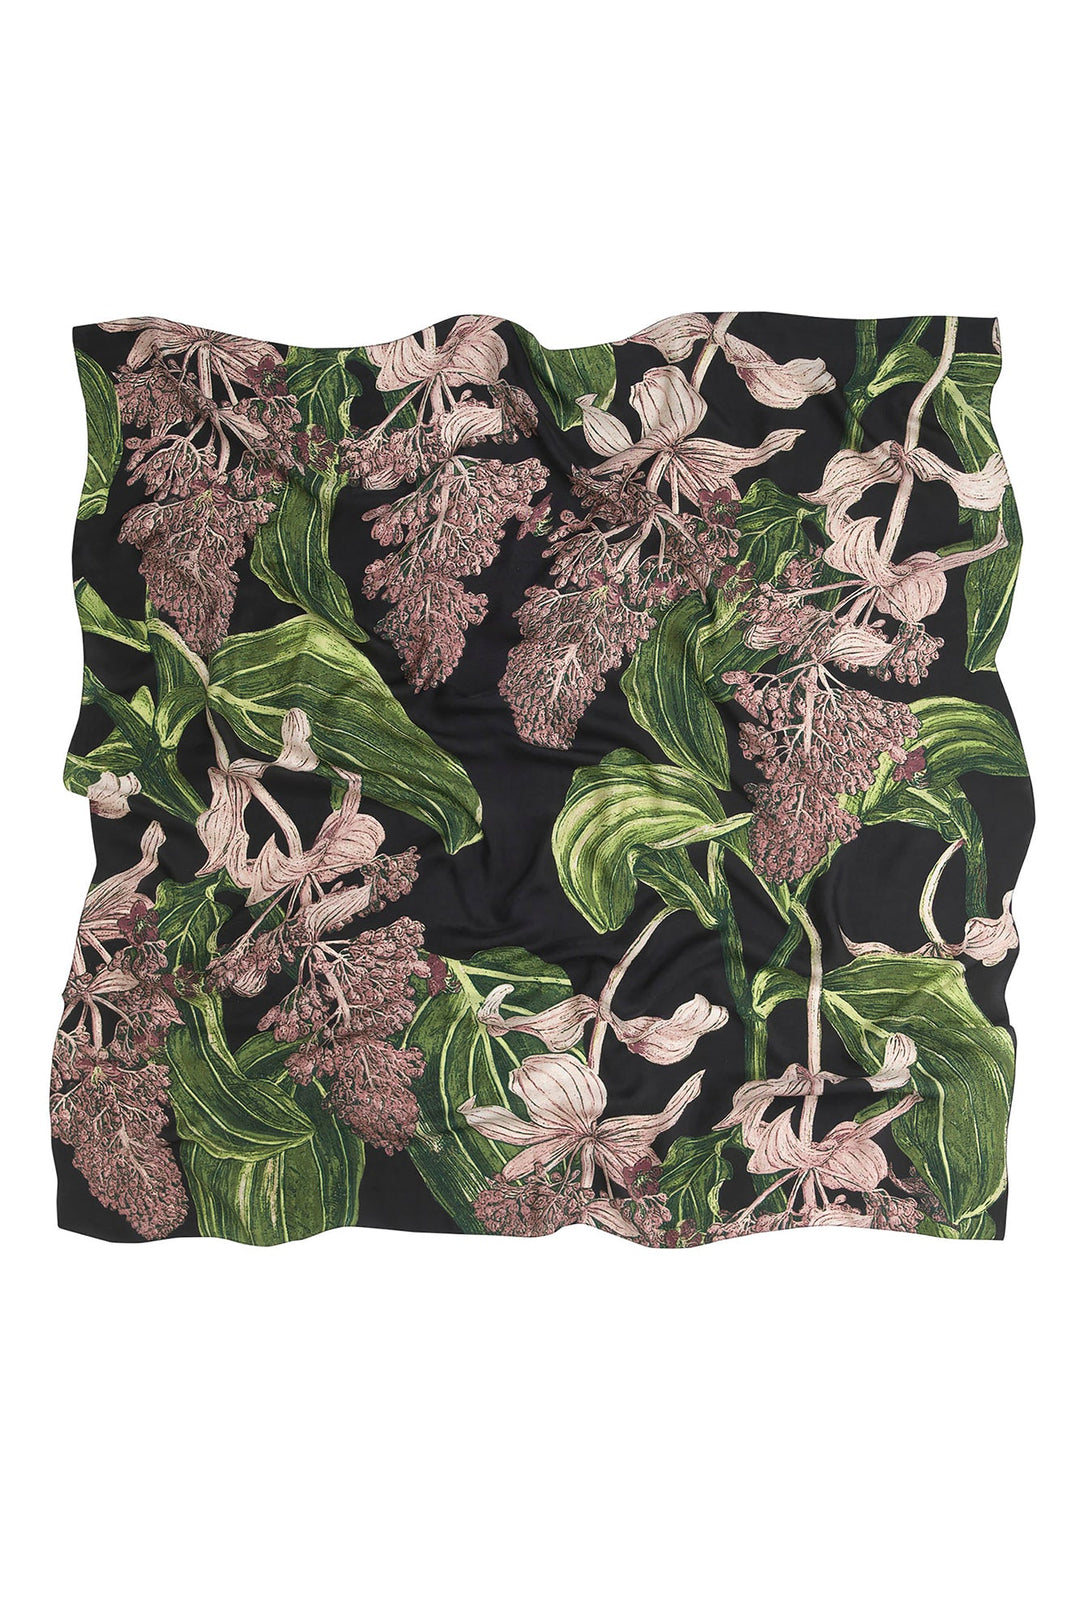 Marianne North Medinilla Silk Scarf- 100% silk, 100% hand screen printed and a whole 100cm x 100cm of print, this silk scarf oozes luxury whether you wear it knotted around your neck, as a headscarf or fastened around the handle of your favourite handbag.